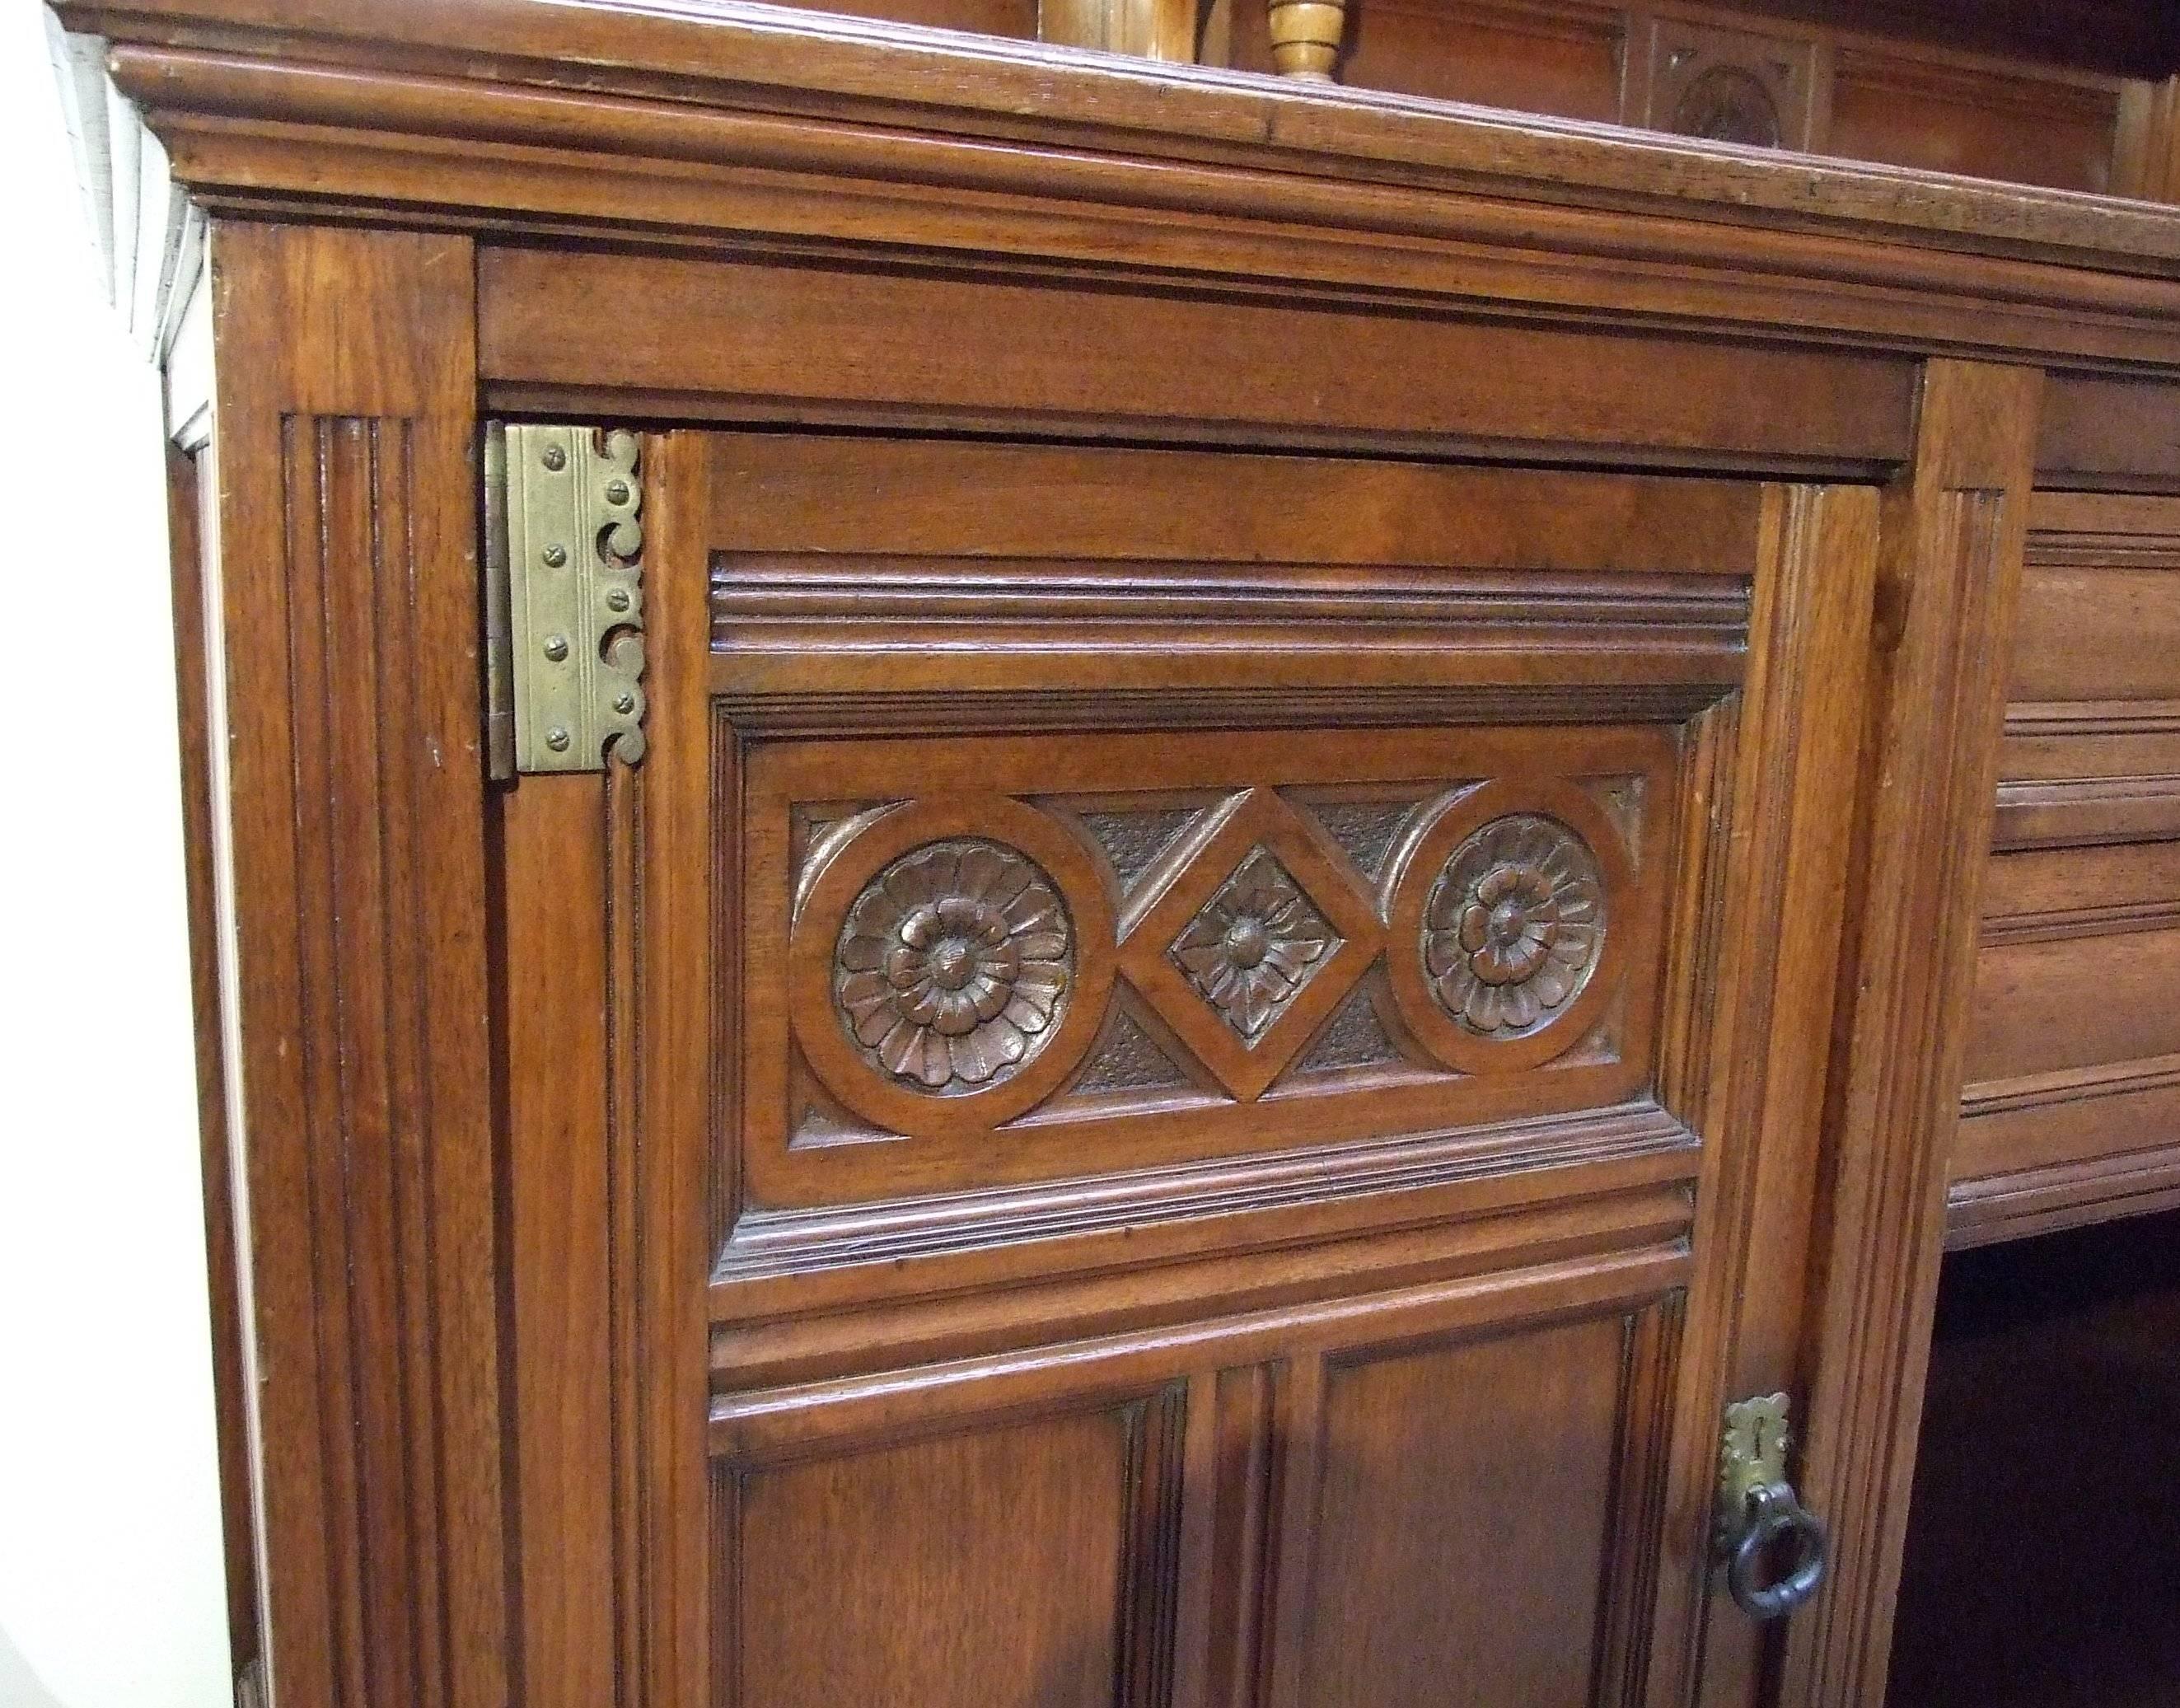 A walnut Aesthetic sideboard, the design attributed to Bruce Talbert, made by Gillows of Lancaster (stamped), circa 1875. Measures: 191cm (75in) high, 191cm (75in) wide, 61cm (24in) deep.